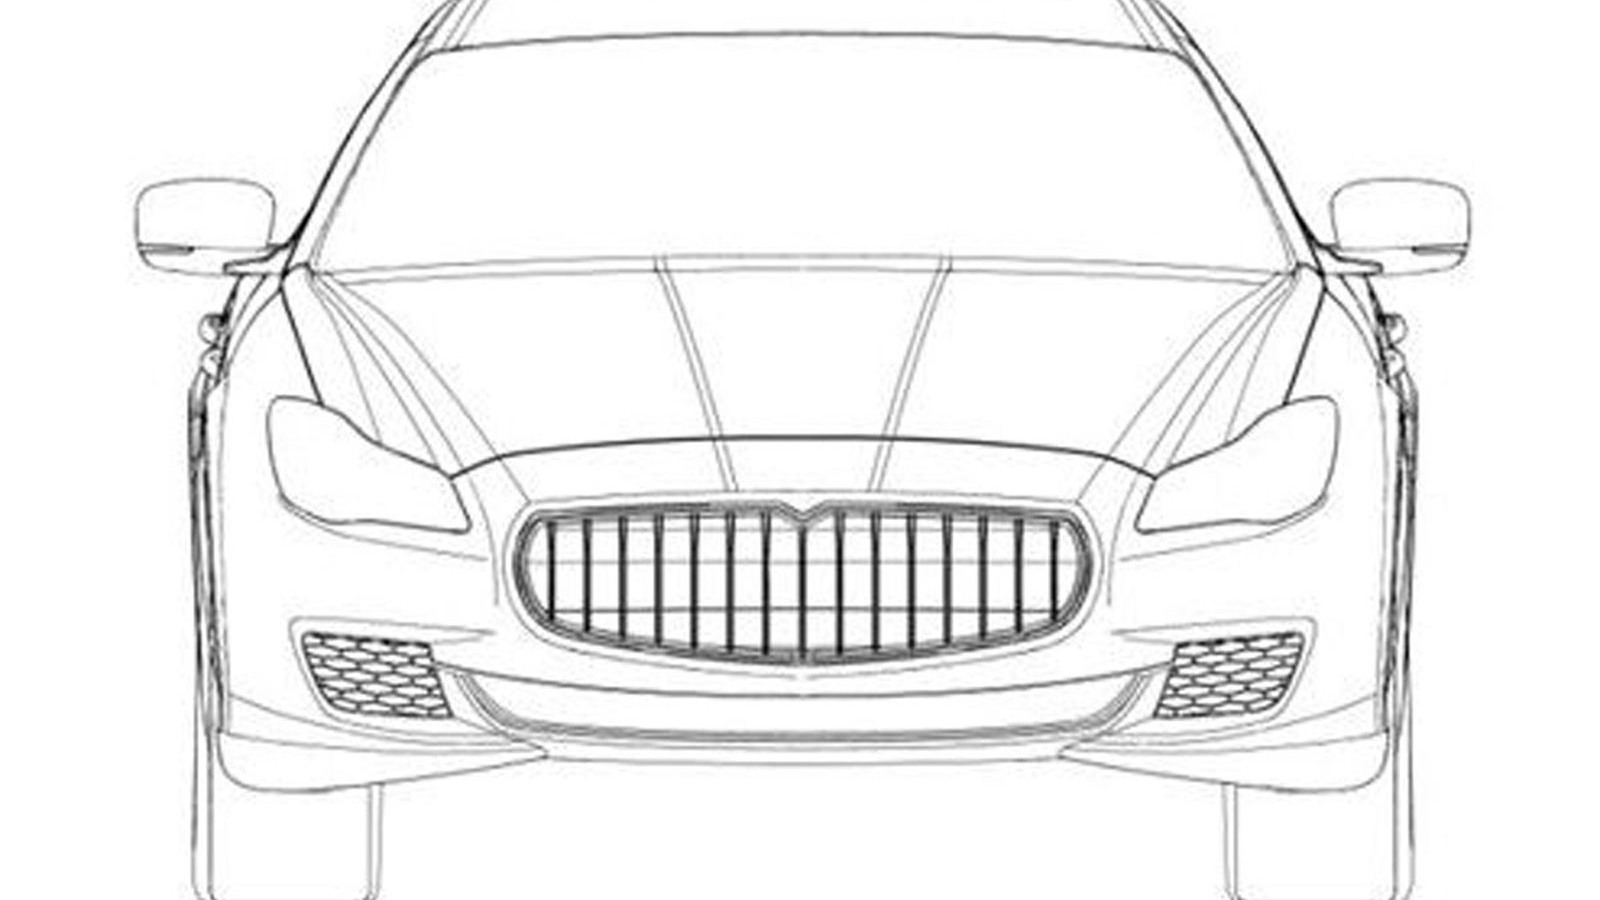 Alleged patent drawings for 2014 Maserati Quattroporte